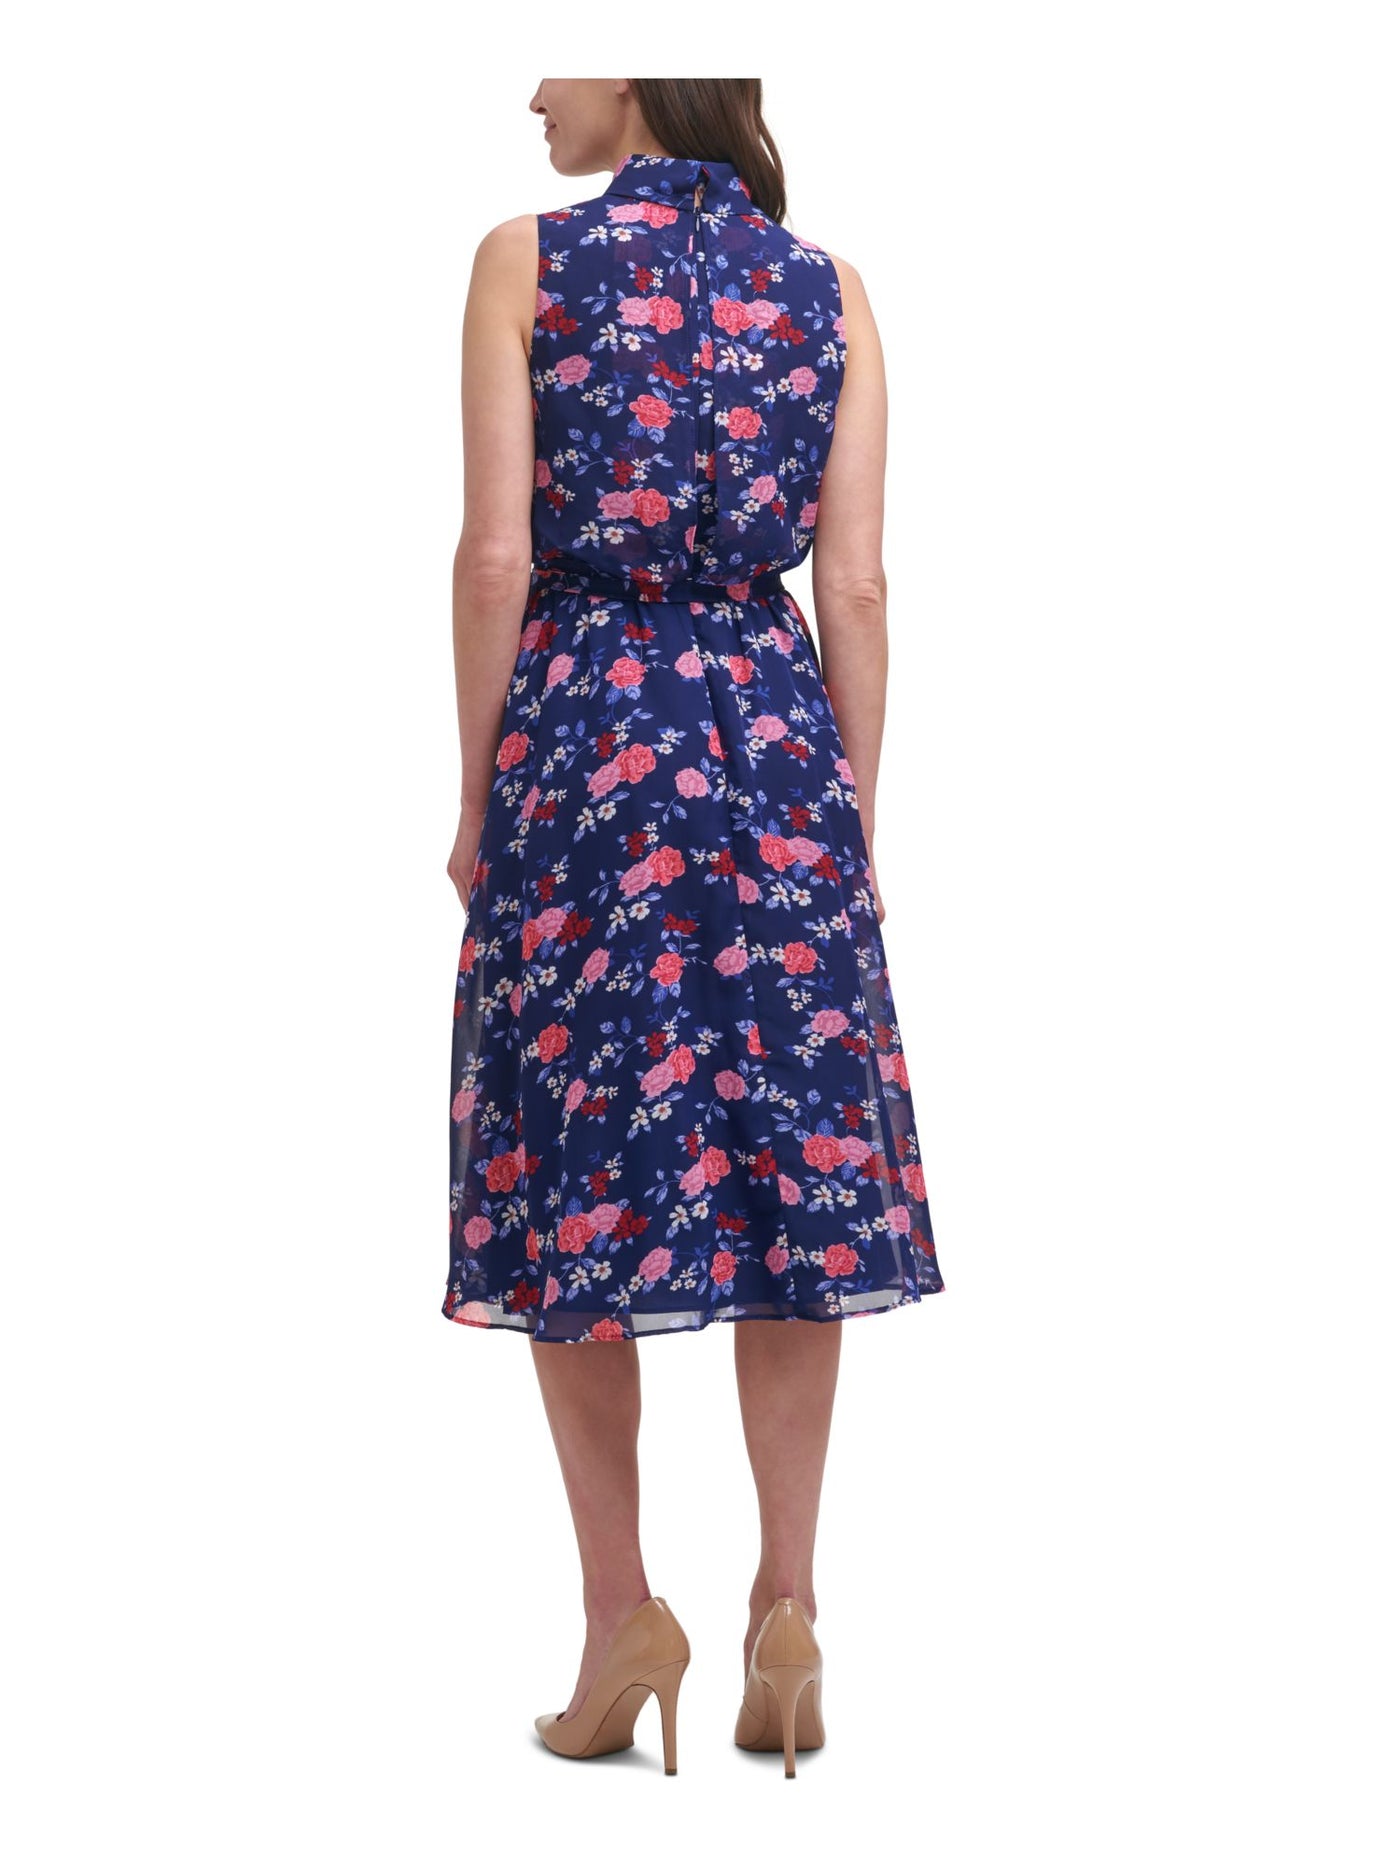 HARPER ROSE Womens Navy Zippered Belted Mock Roll-neck Chiffon Floral Sleeveless Midi Wear To Work Fit + Flare Dress 8